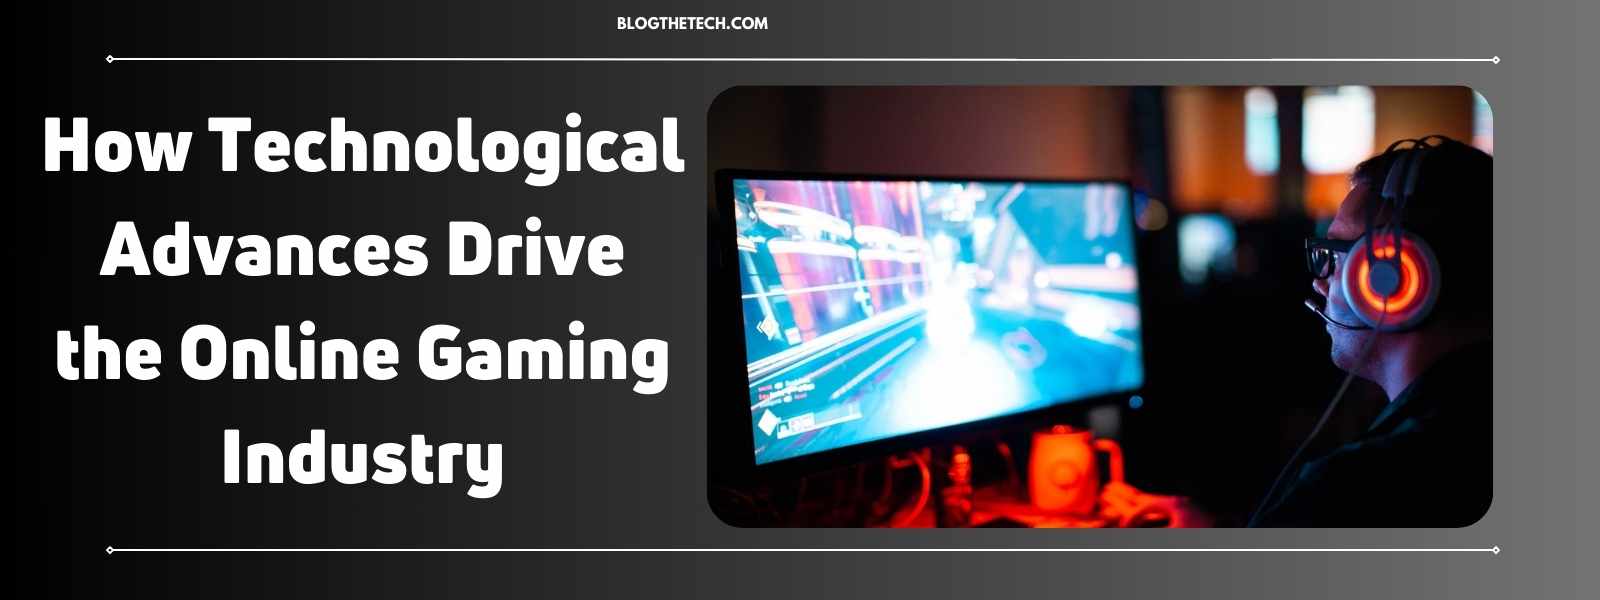 How Technological Advances Drive the Online Gaming Industry